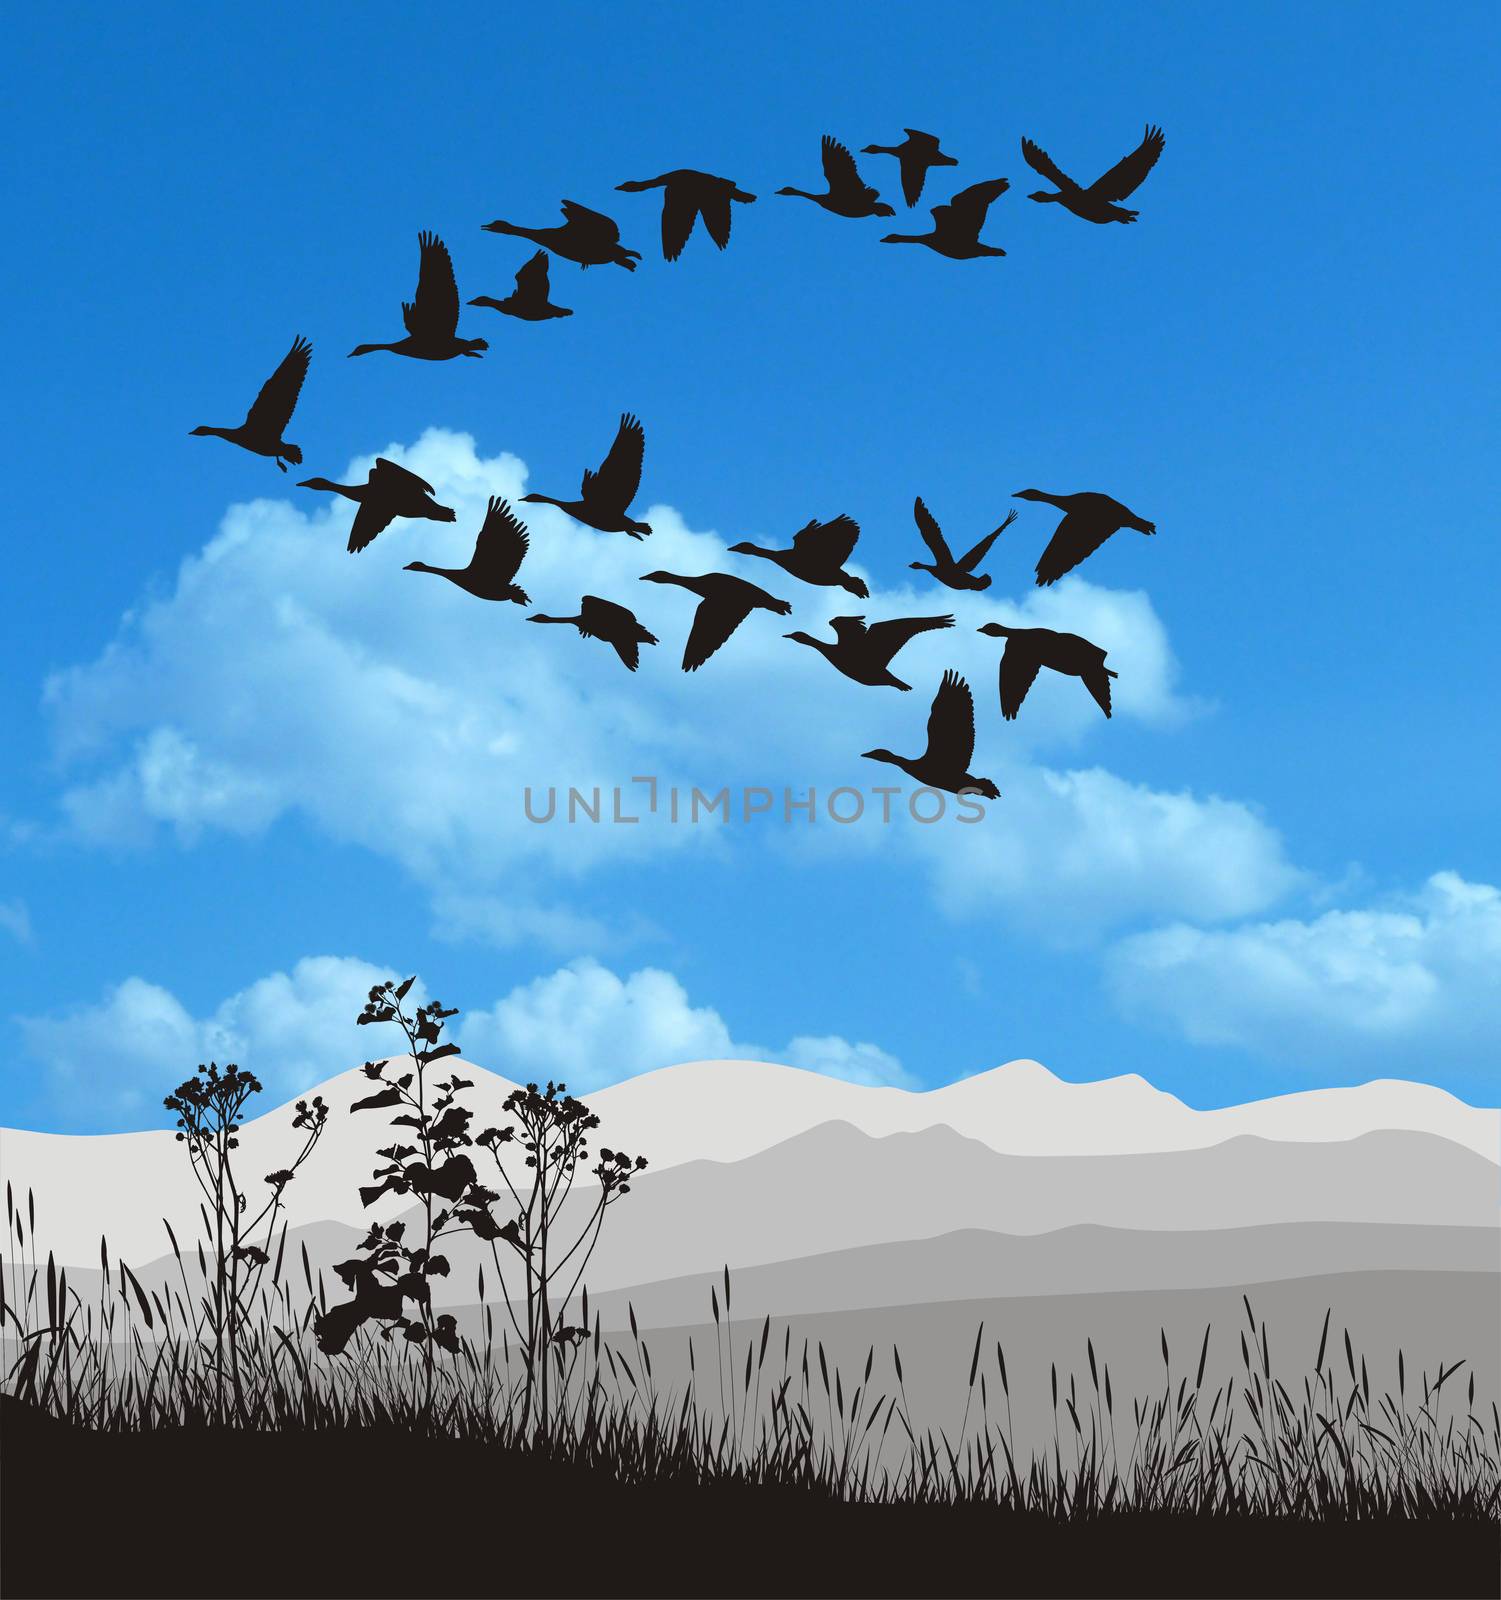 Winter landscape and migratory geese flying